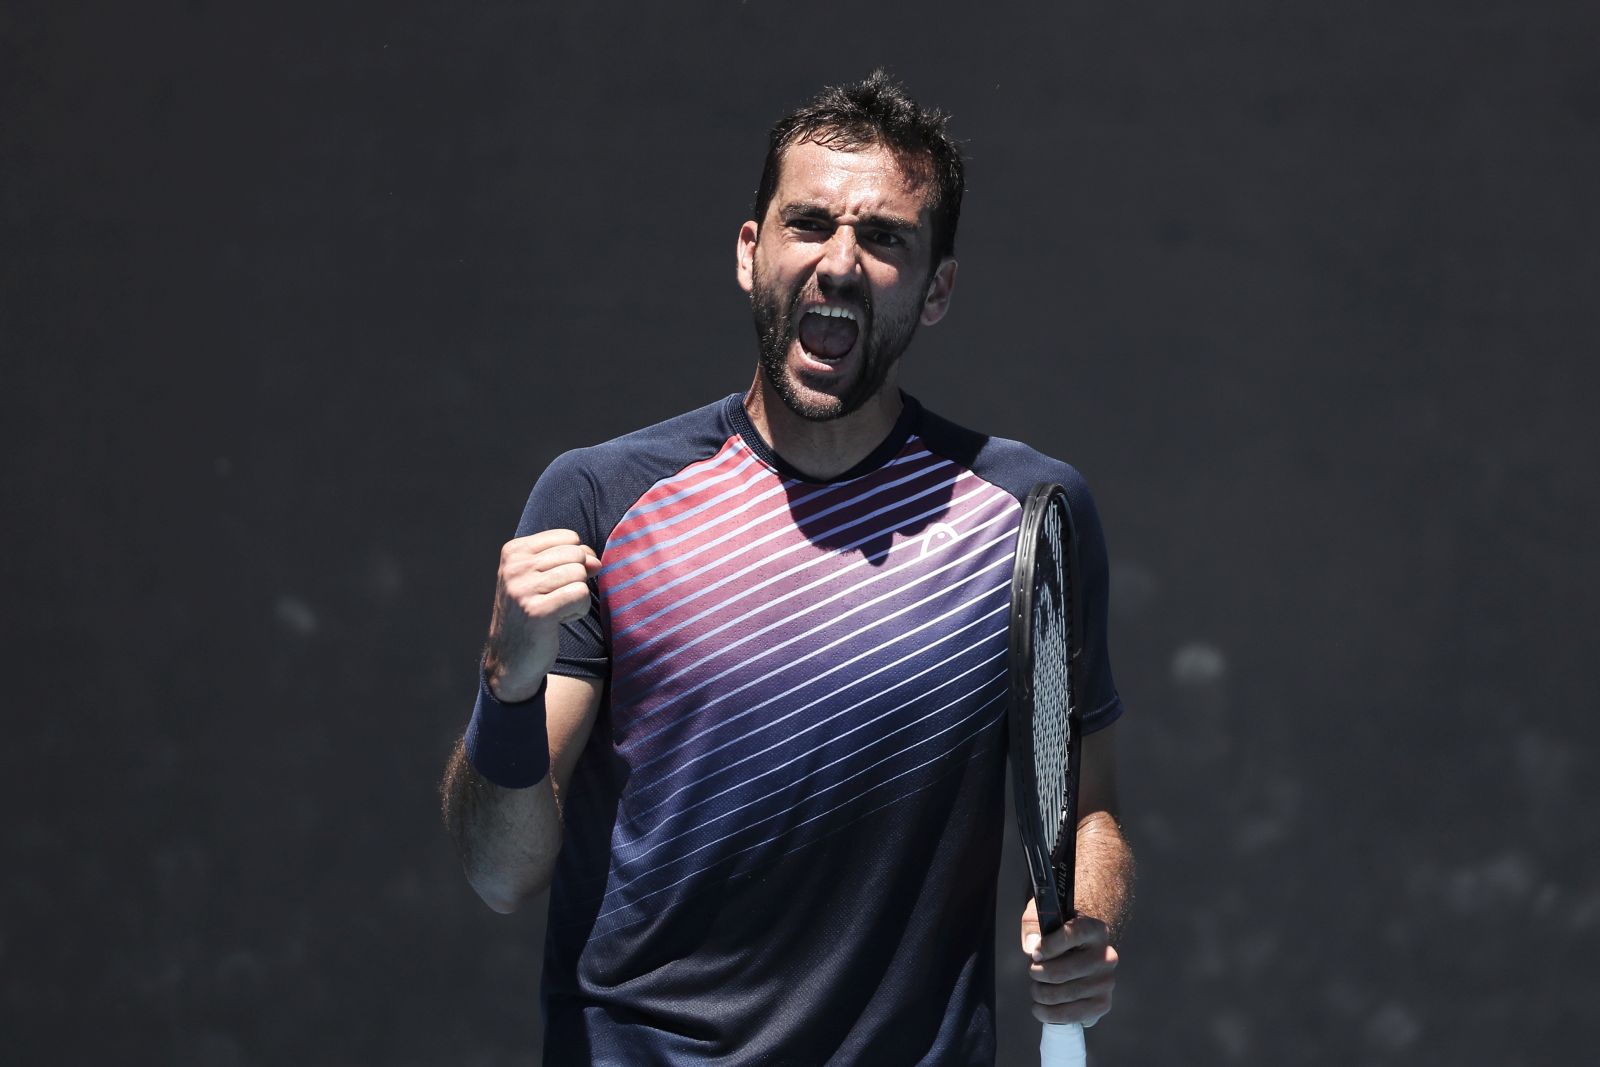 epa09696212 Marin Cilic of Croatia celebrates winning the second set during his second round match against Norbert Gombos of Slovakia at the Australian Open Grand Slam tennis tournament in Melbourne, Australia, 20 January 2022.  EPA/JASON O'BRIEN